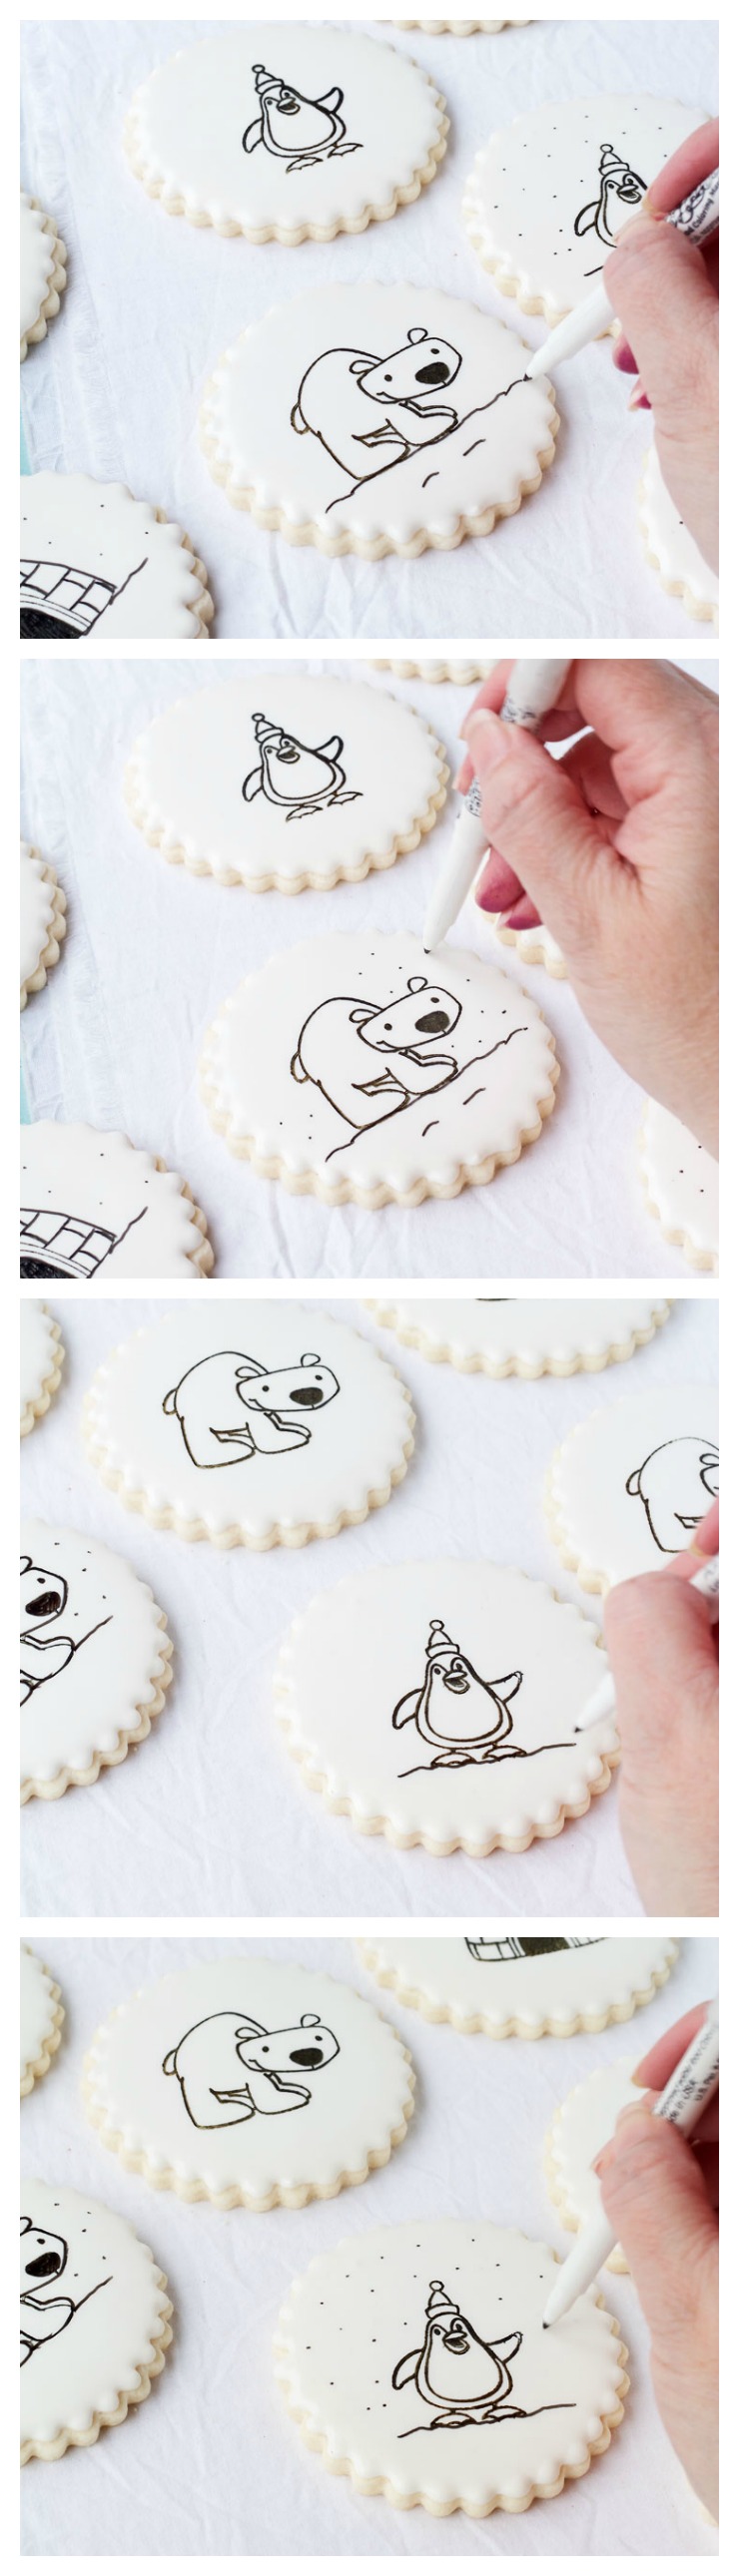 How to Stamp on a Cookie - This makes cookie decorating super easy. You are going to LOVE it! www.thebearfootbaker.com